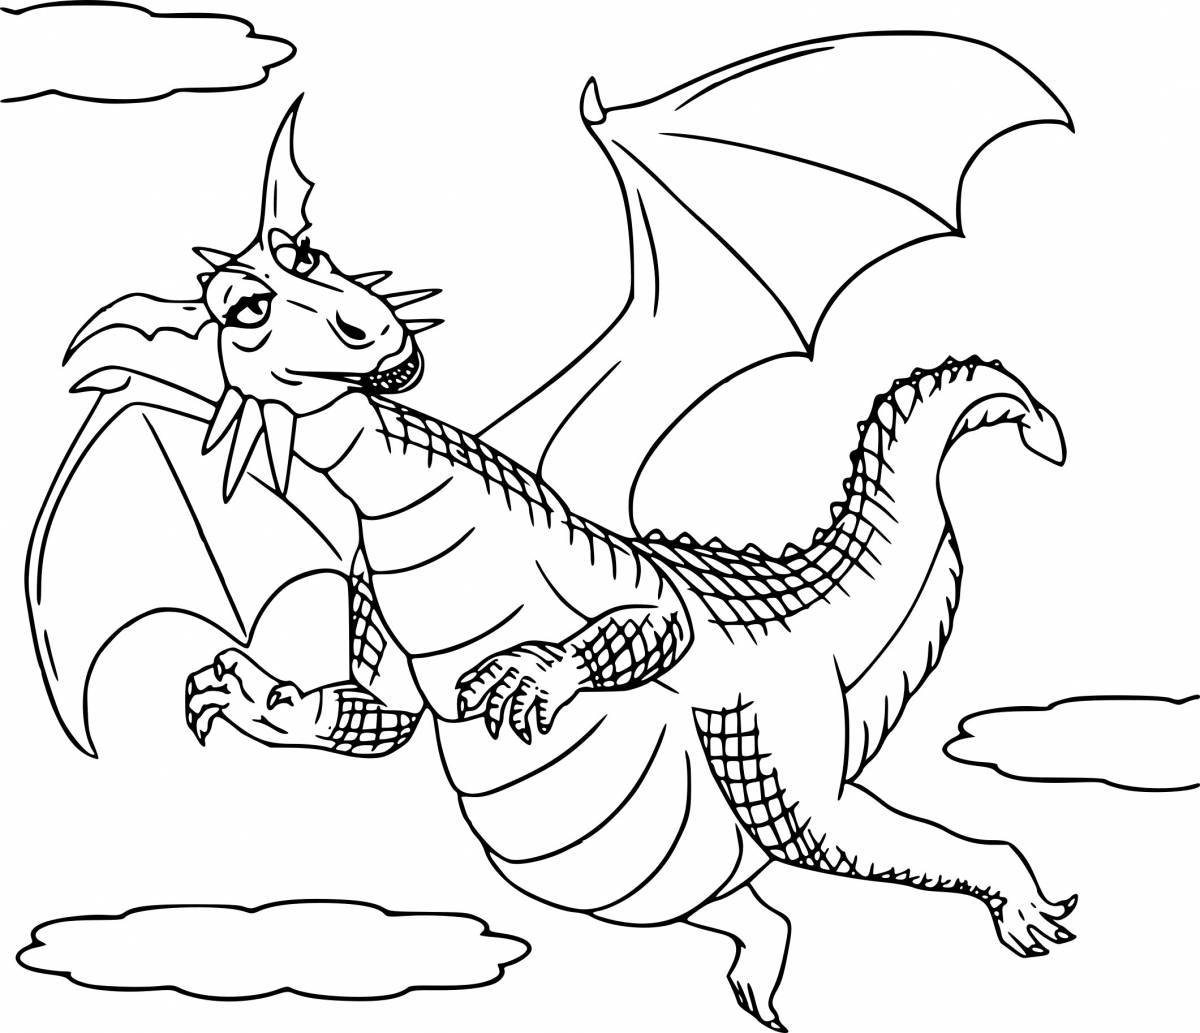 Difficult coloring dragon for kids